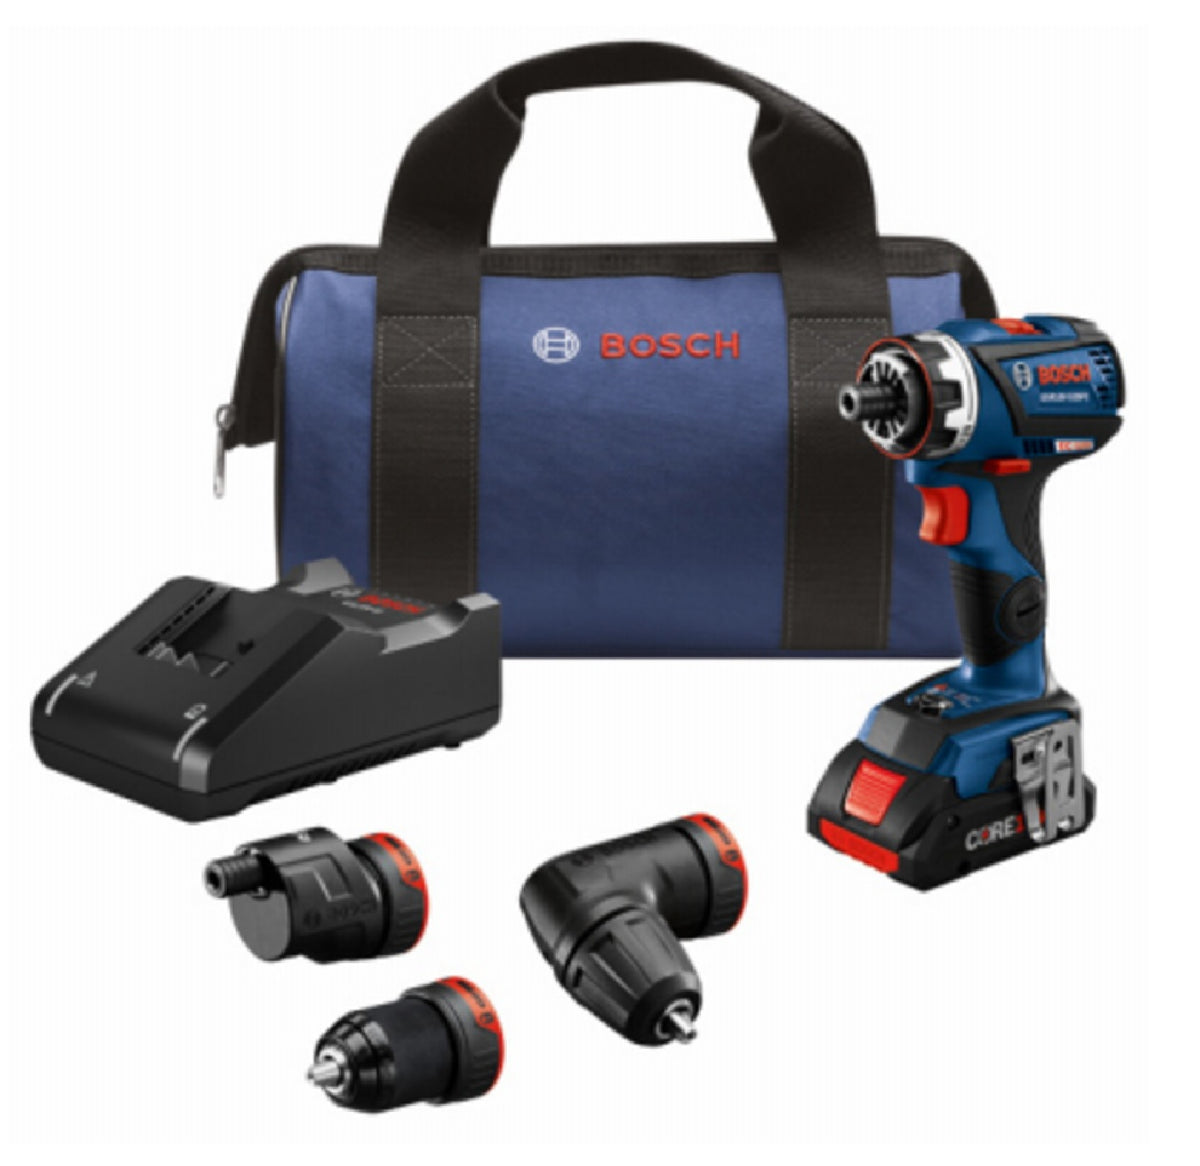 Bosch GSR18V-535FCB15 EC Brushless Connected-Ready Flexiclick 5-In-1 Drill/Driver, 18 volts